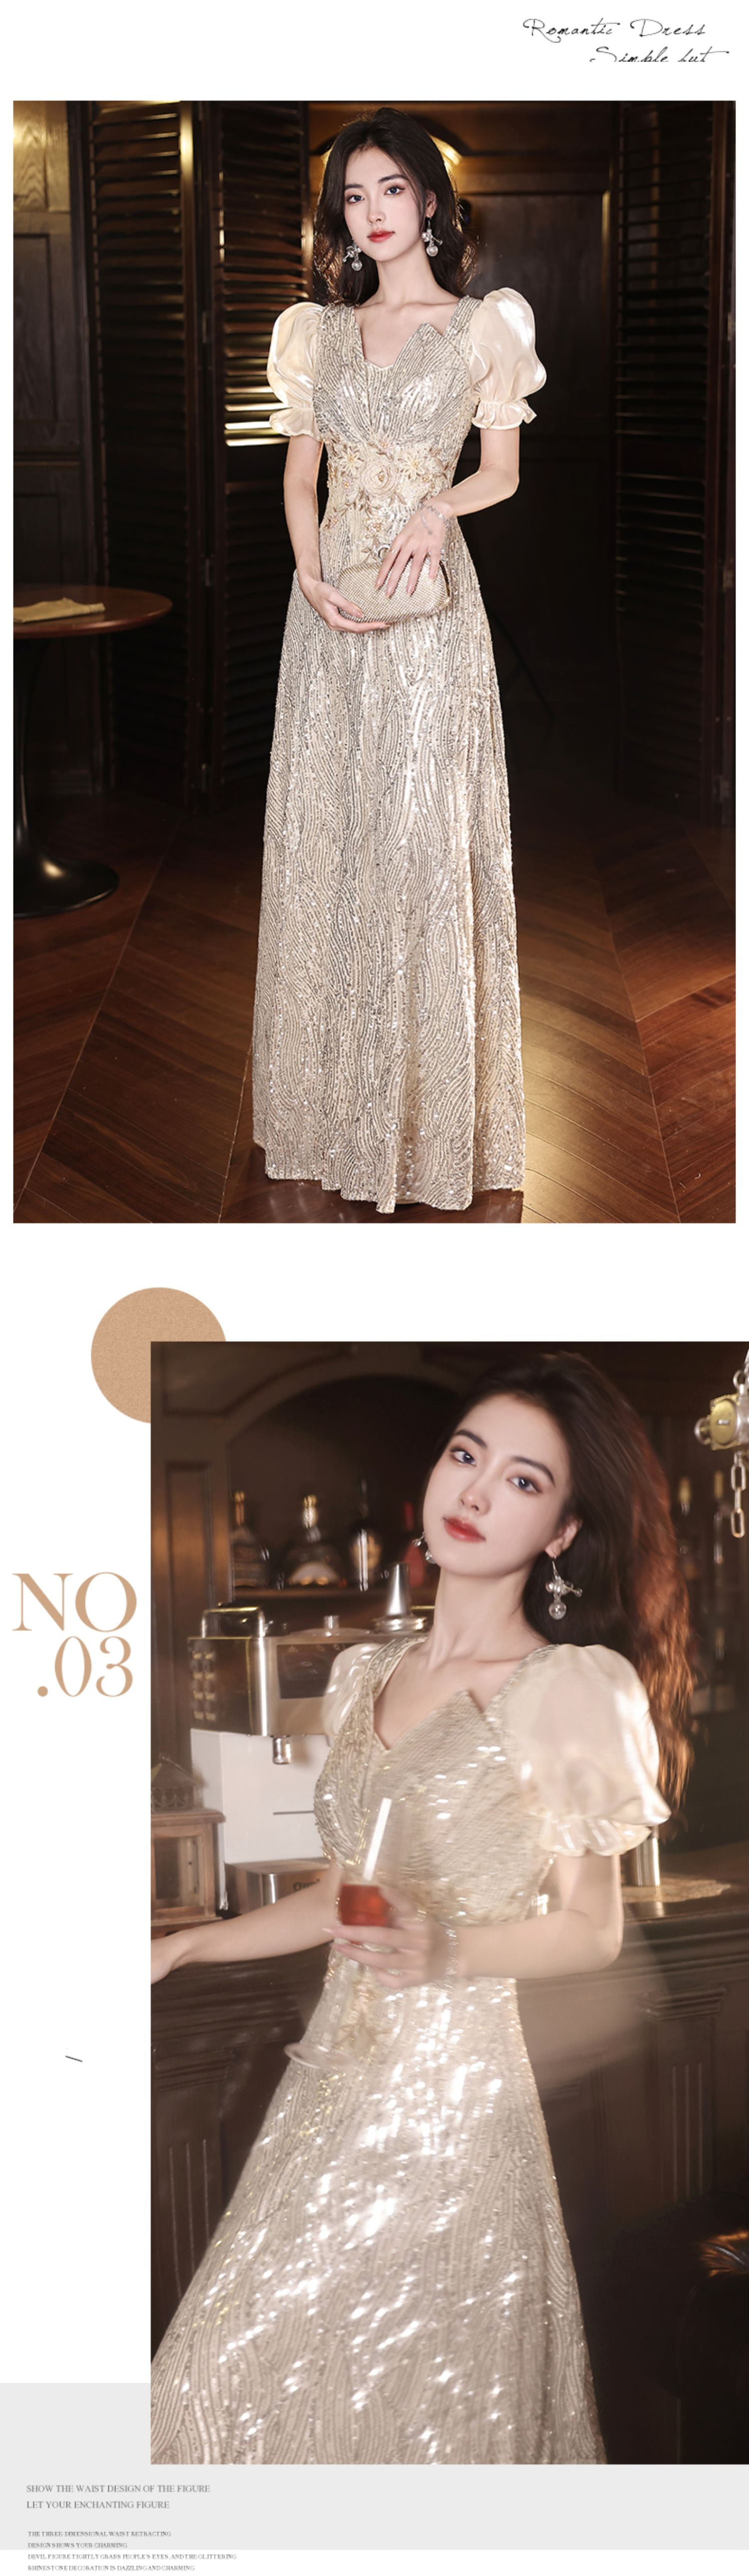 Luxury-Sparkly-Short-Puff-Sleeves-Sequin-Evening-Party-Formal-Dress13